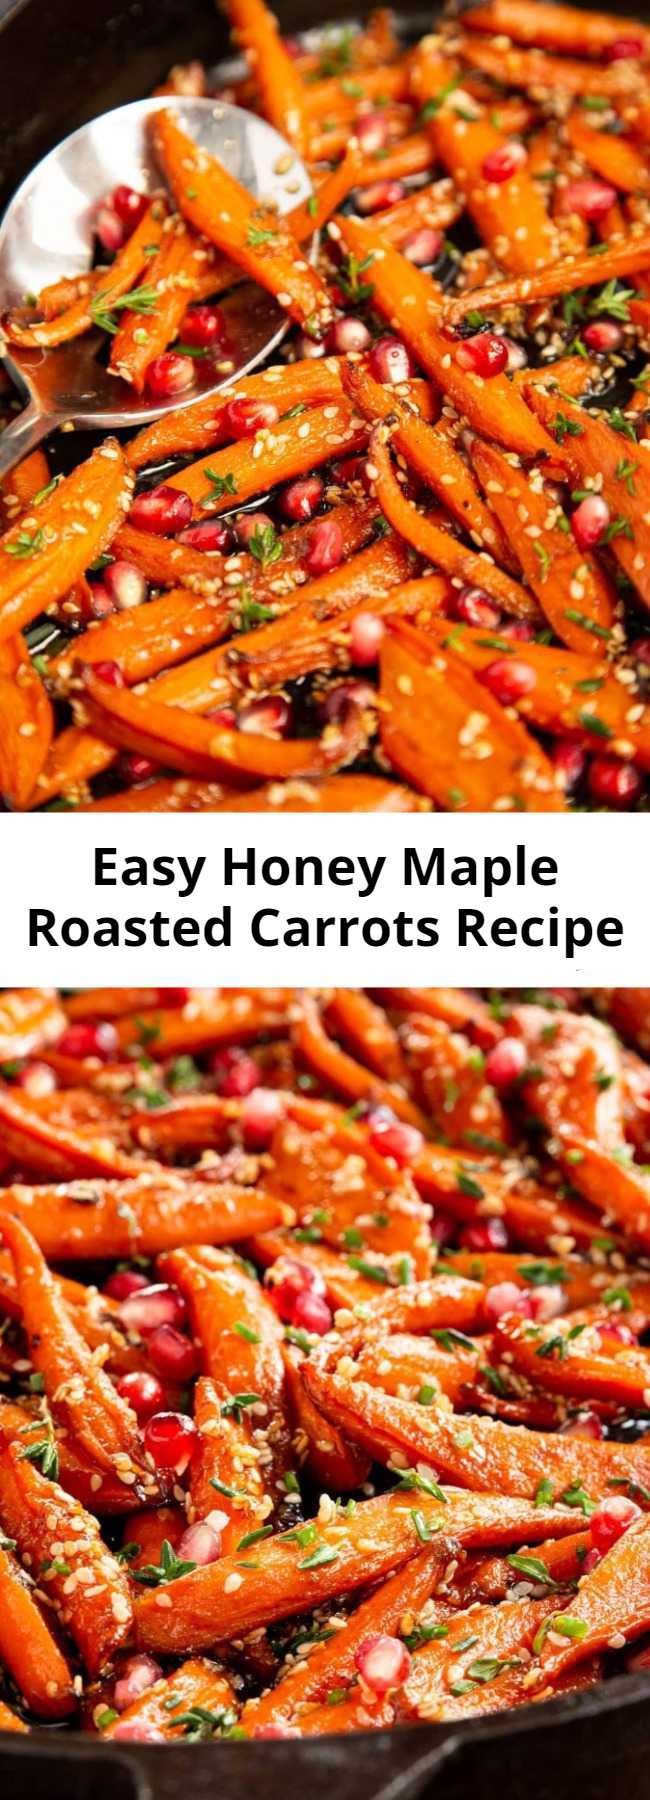 Easy Honey Maple Roasted Carrots Recipe - Transform the everyday humble carrot into a spectacular side with this easy, make-ahead Honey Maple Roasted Carrots recipe!